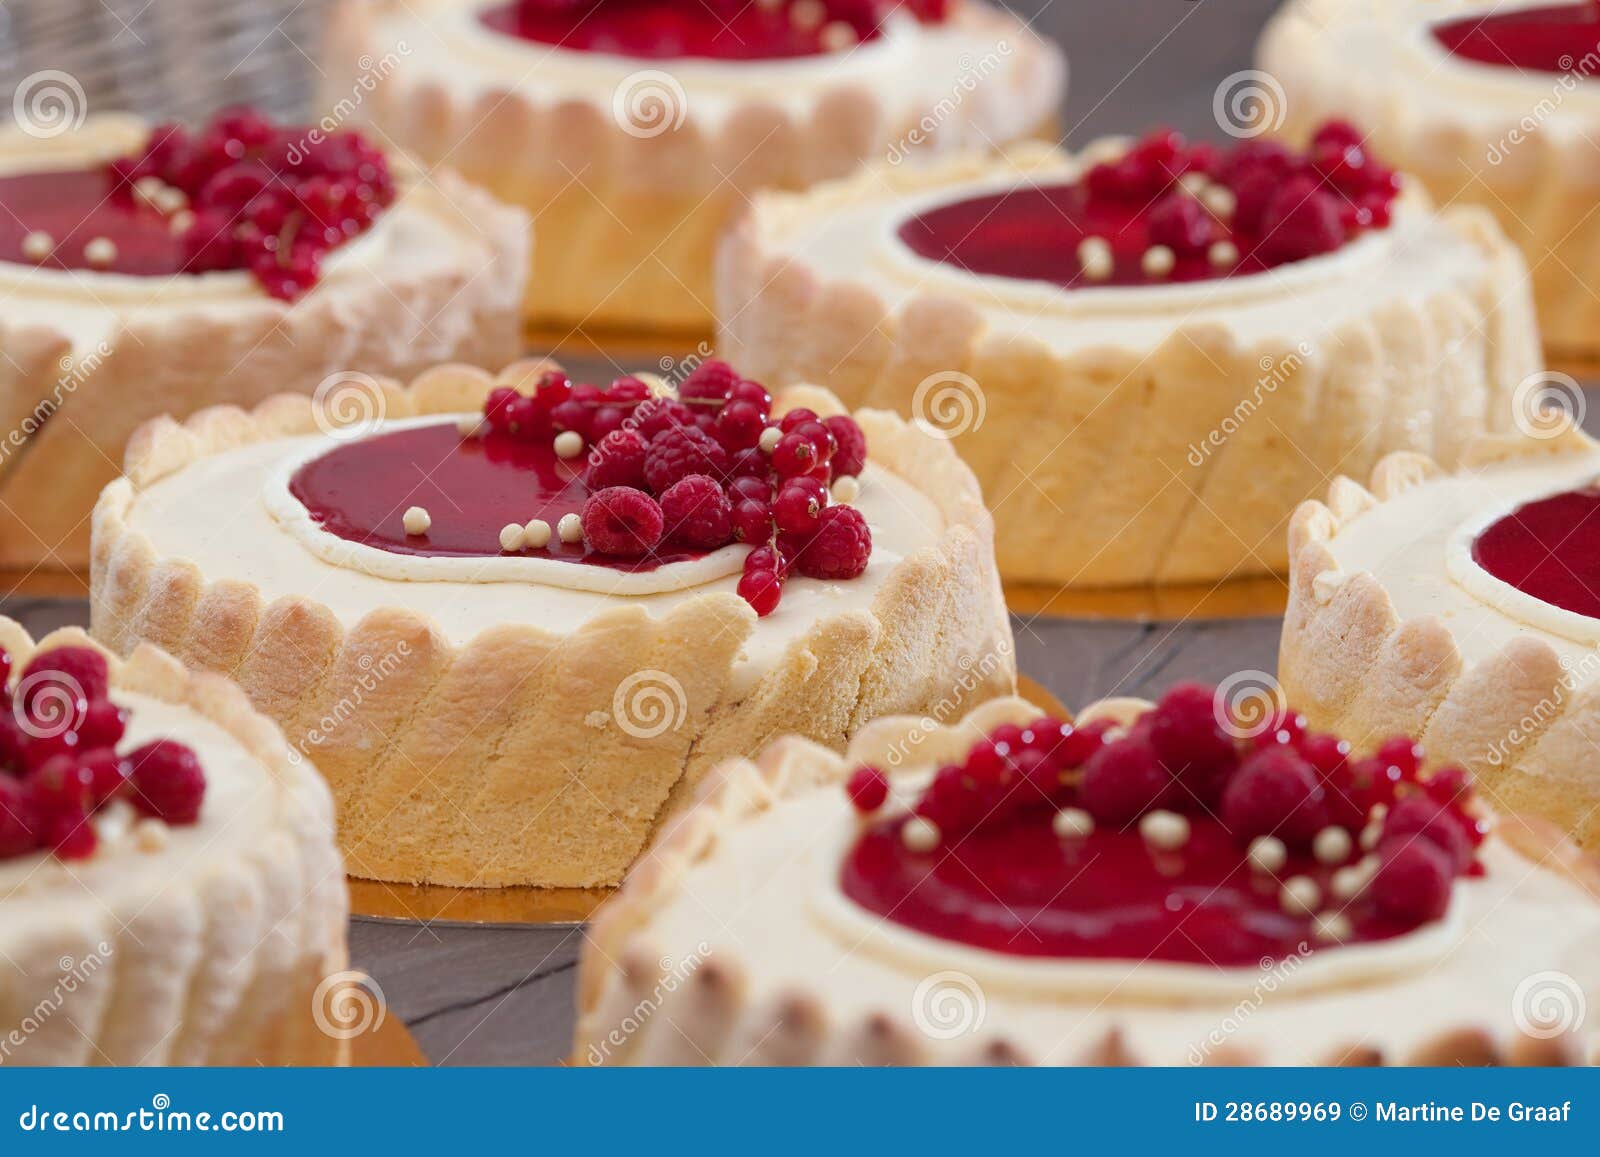 2 Raspberry Charlotte Photos Free Royalty Free Stock Photos From Dreamstime